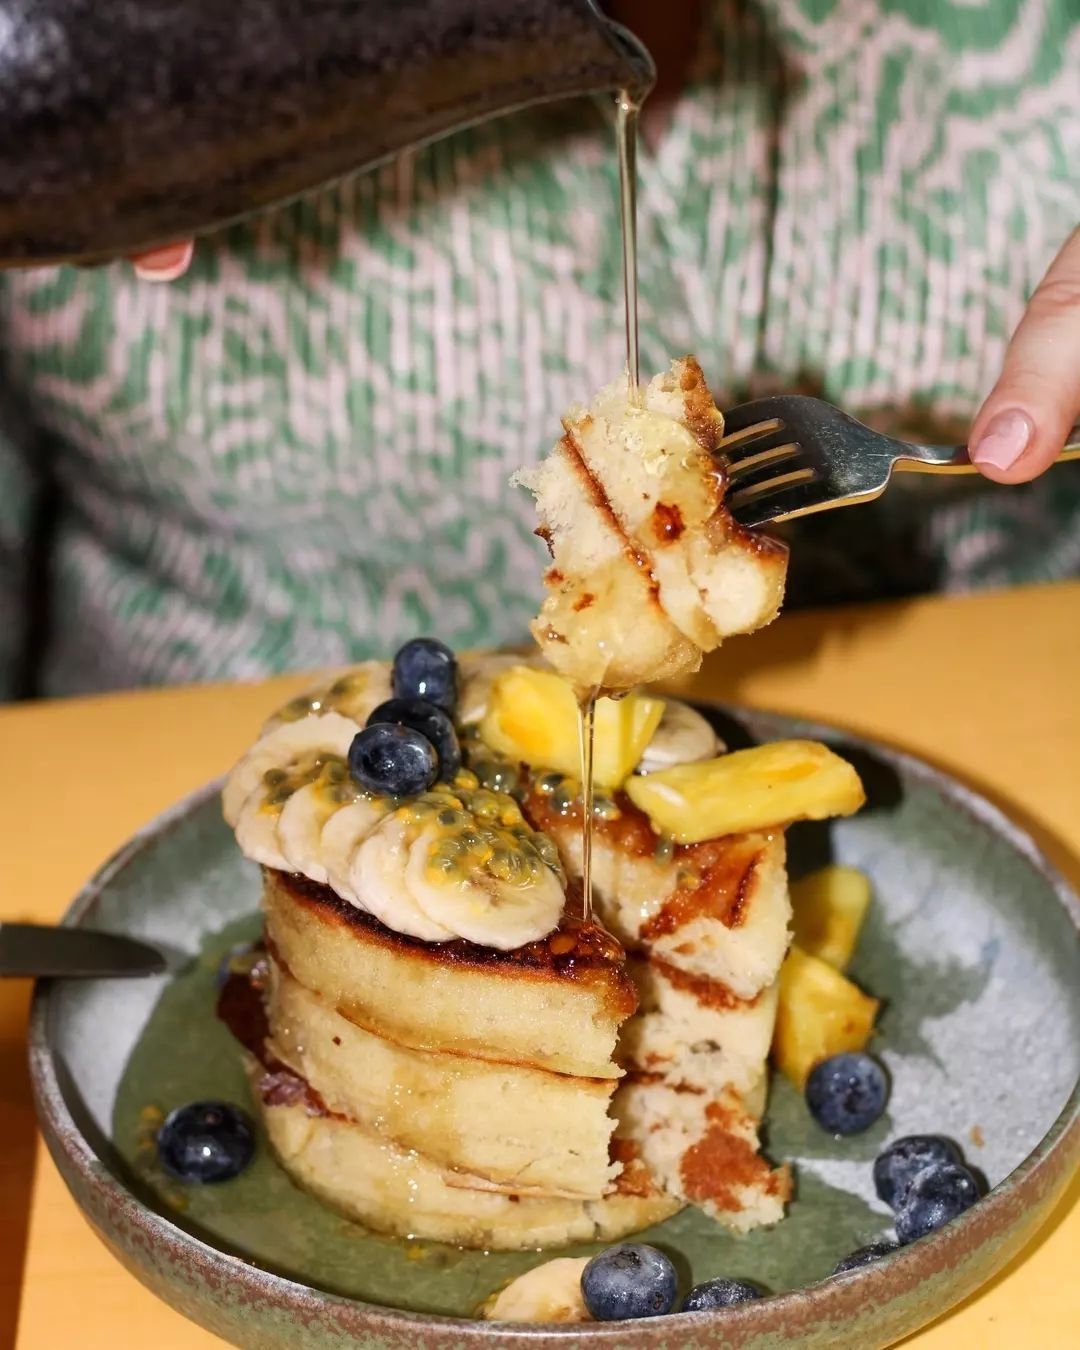 Rise and shine with our Japanese fluffy pancakes! 🥞🌞 Whether it's breakfast time or you're craving something sweet for lunch, these fluffy delights are the perfect start to your day.